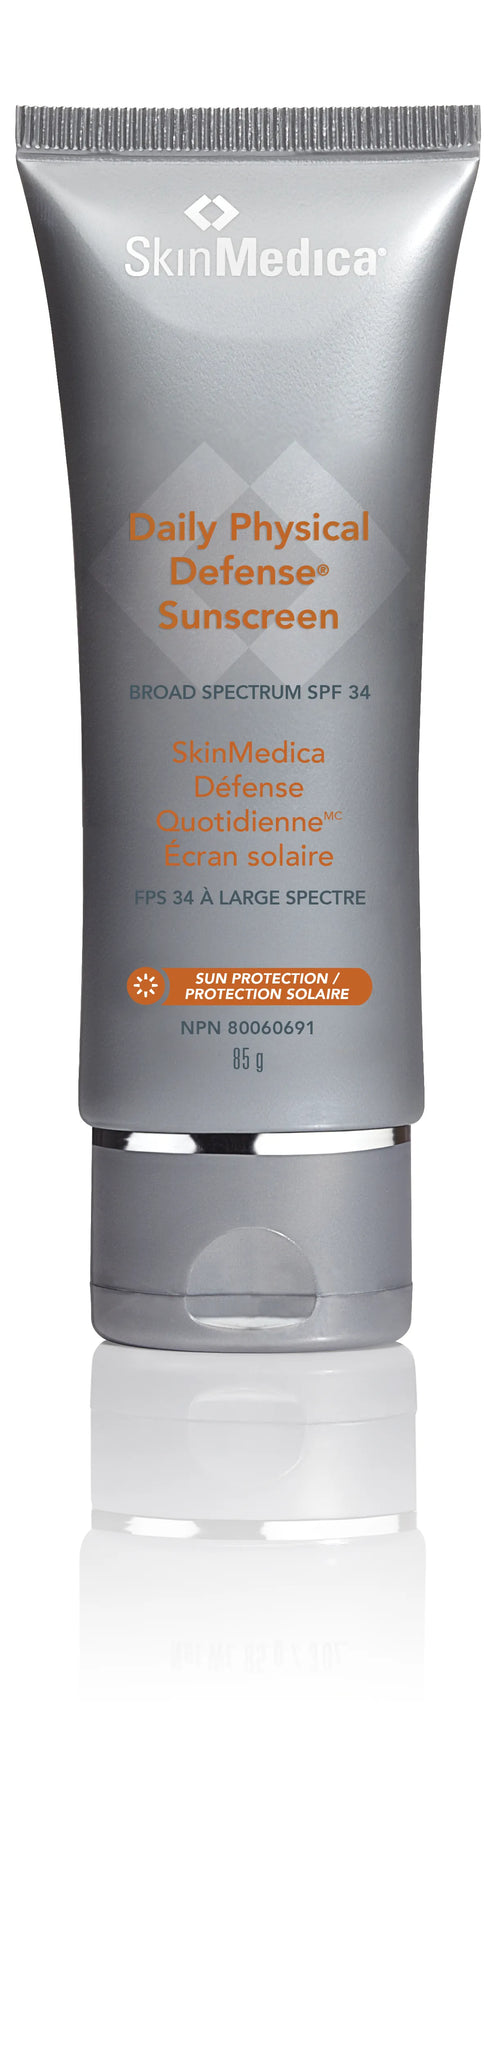 Daily Physical Defense Sunscreen Lotion